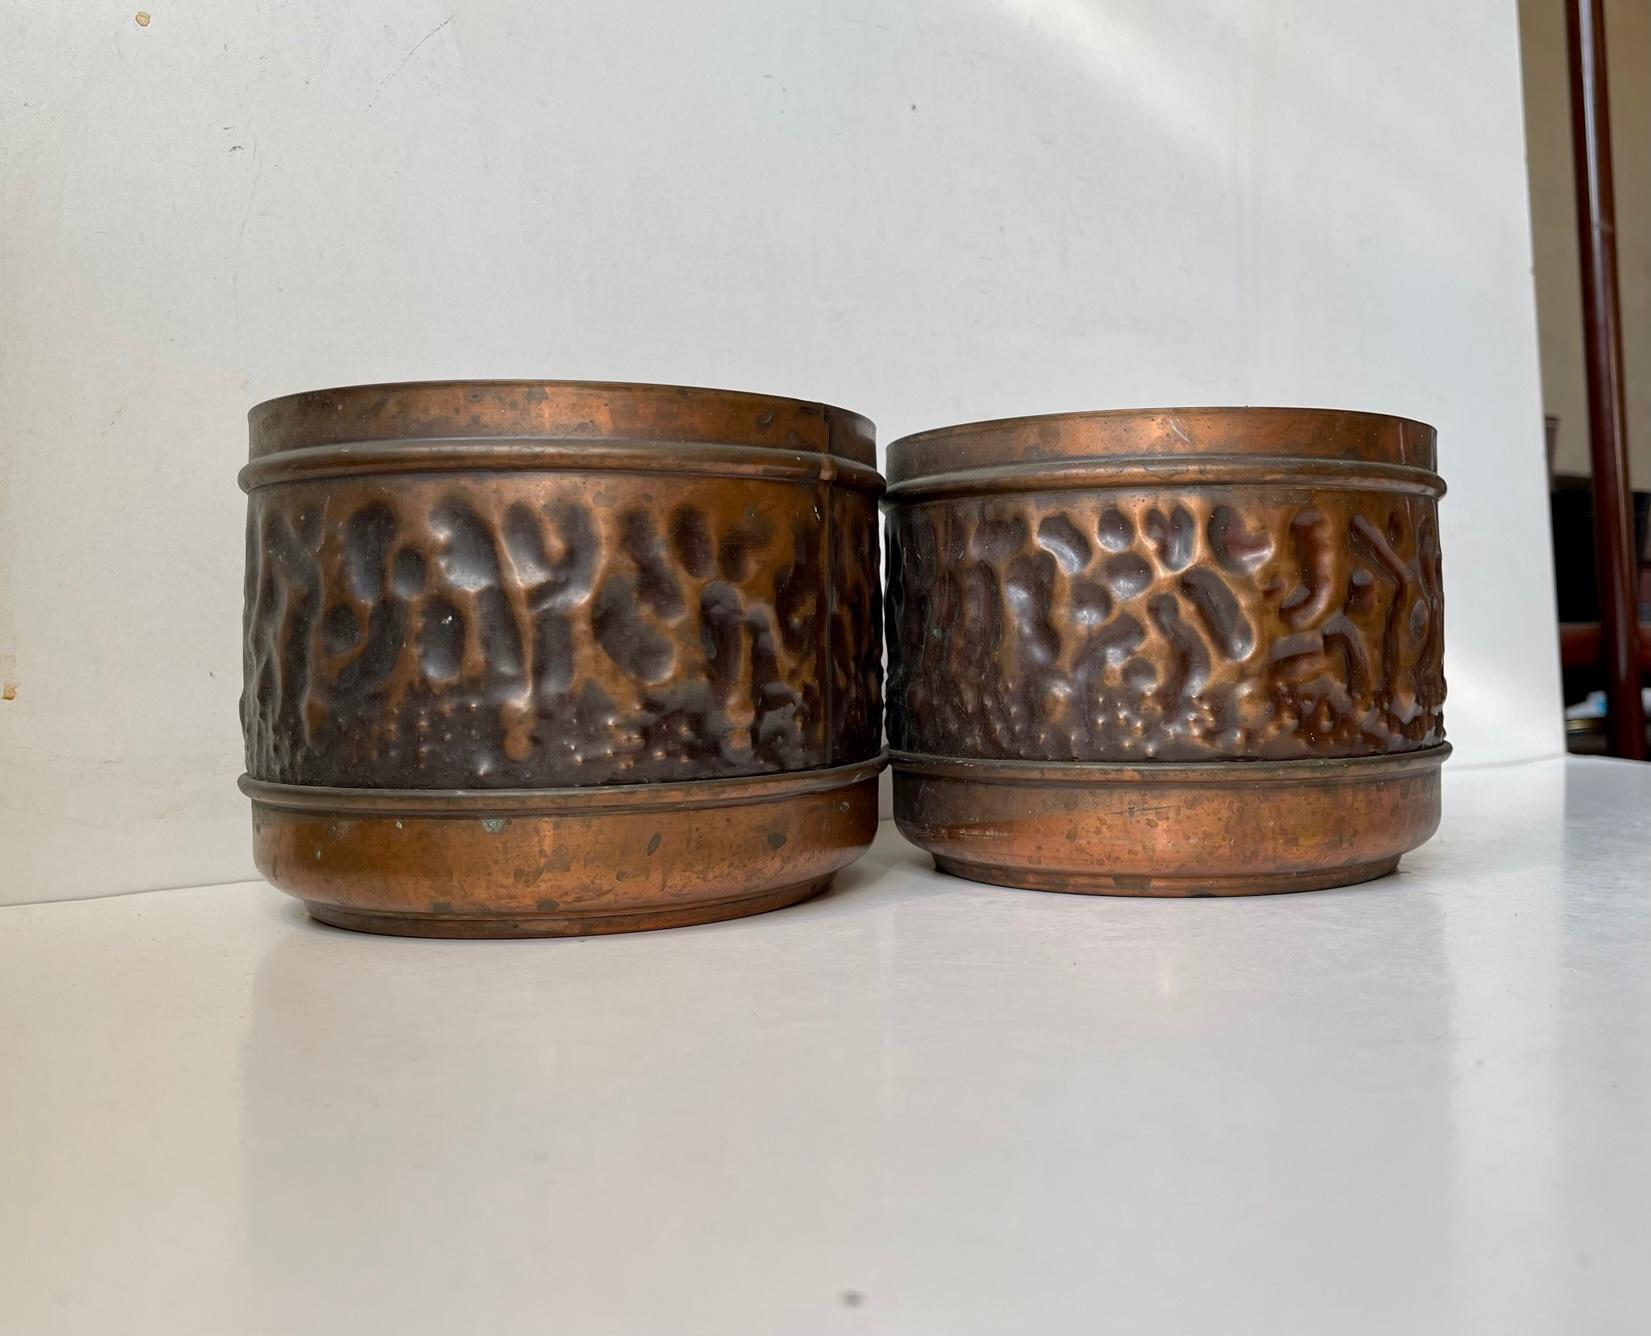 A pair of copper planters with matching patina. Embossed ina pattern that mimics the surface of the moon. Designed and manufactured by Sandnes in Norway circa 1970. Both marked with label from Sandnes. Measurements: D: 16 cm, H: 12 cm.